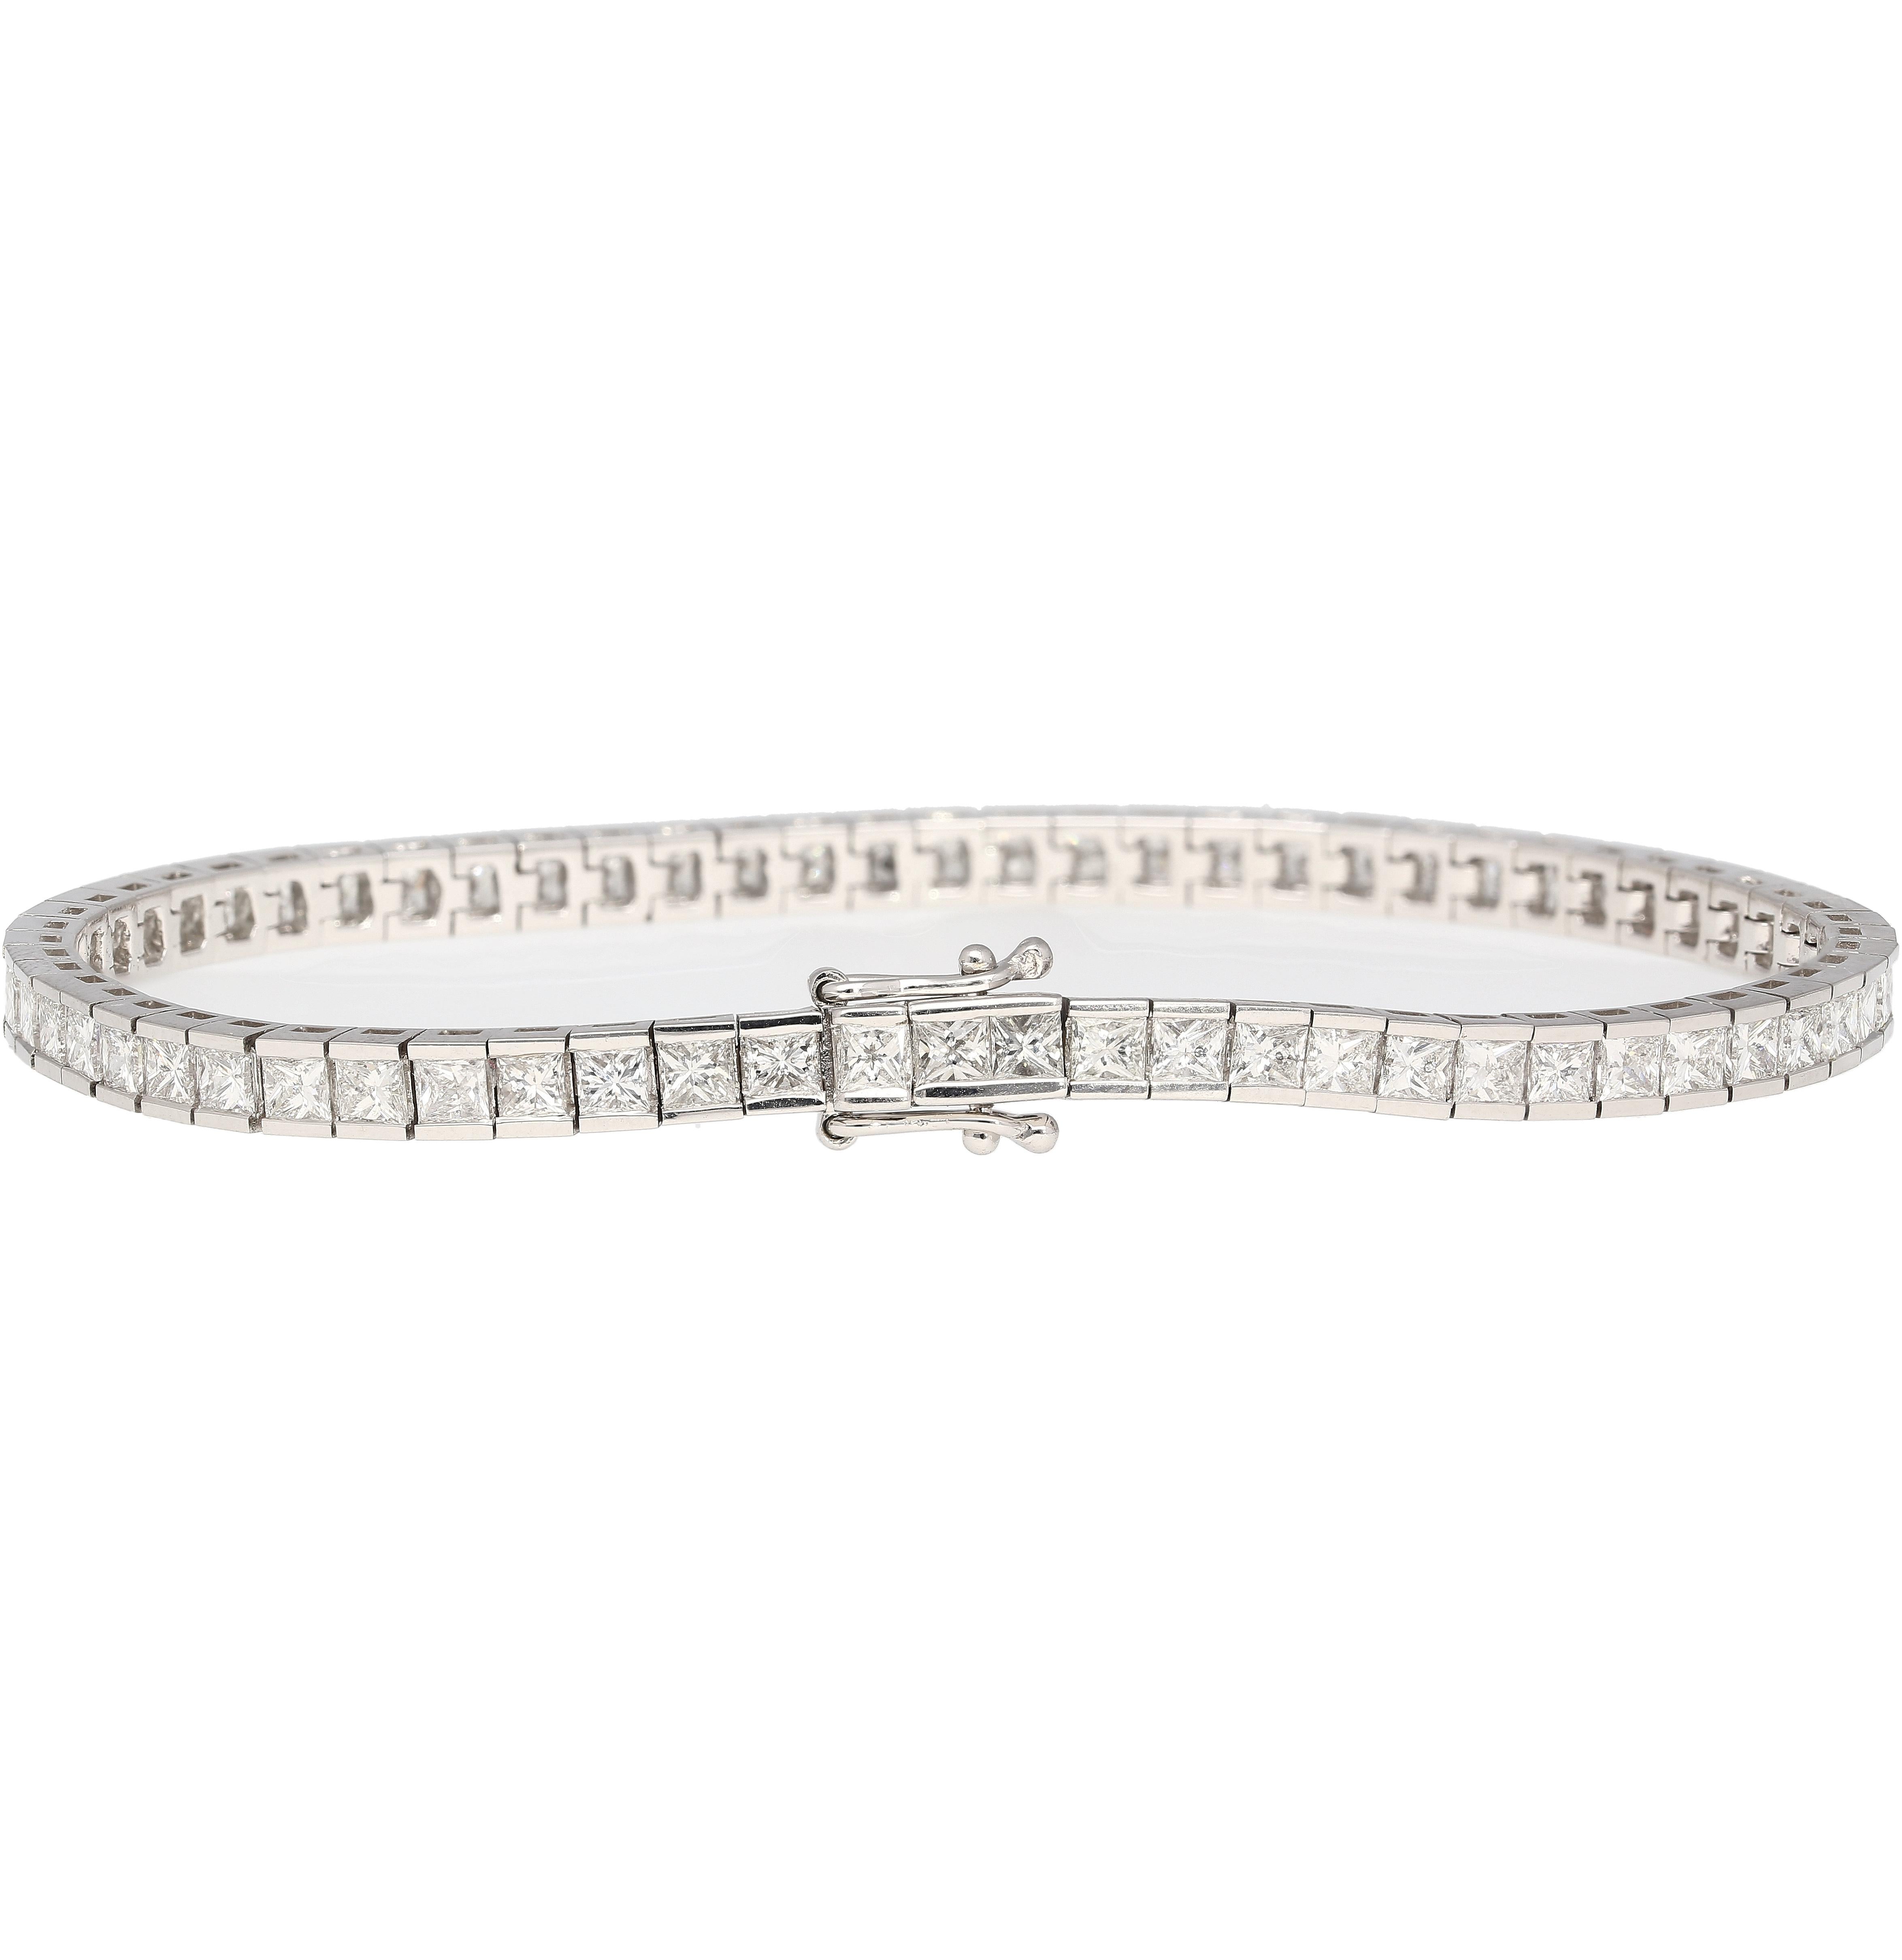 6-carat total princess cut natural diamond tennis bracelet in 18k white gold. Fitted with a secure box and safety closure. The stones are all eye clean, superbly white, and full of life. Set in a half-bezel channel setting that perfectly integrates